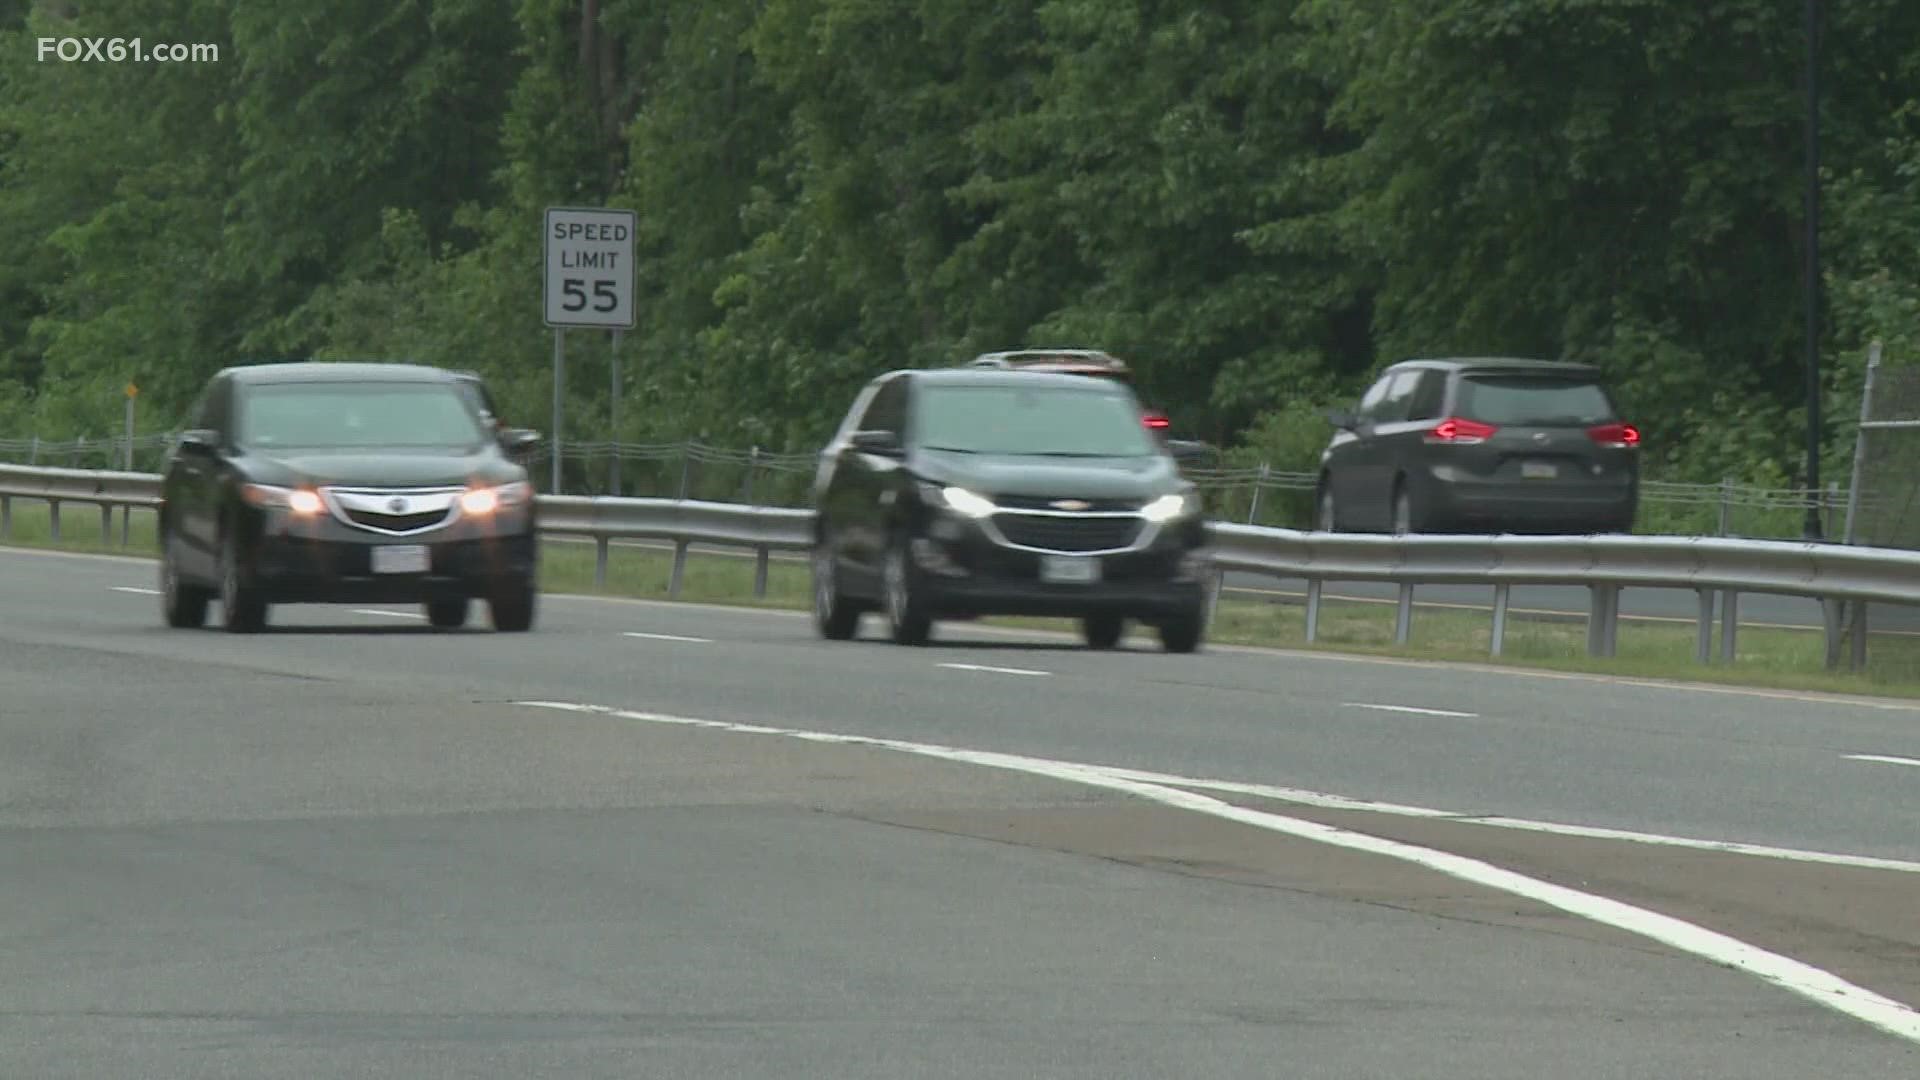 35 million people are expected to travel by car this Memorial Day weekend across the United States, according to AAA.